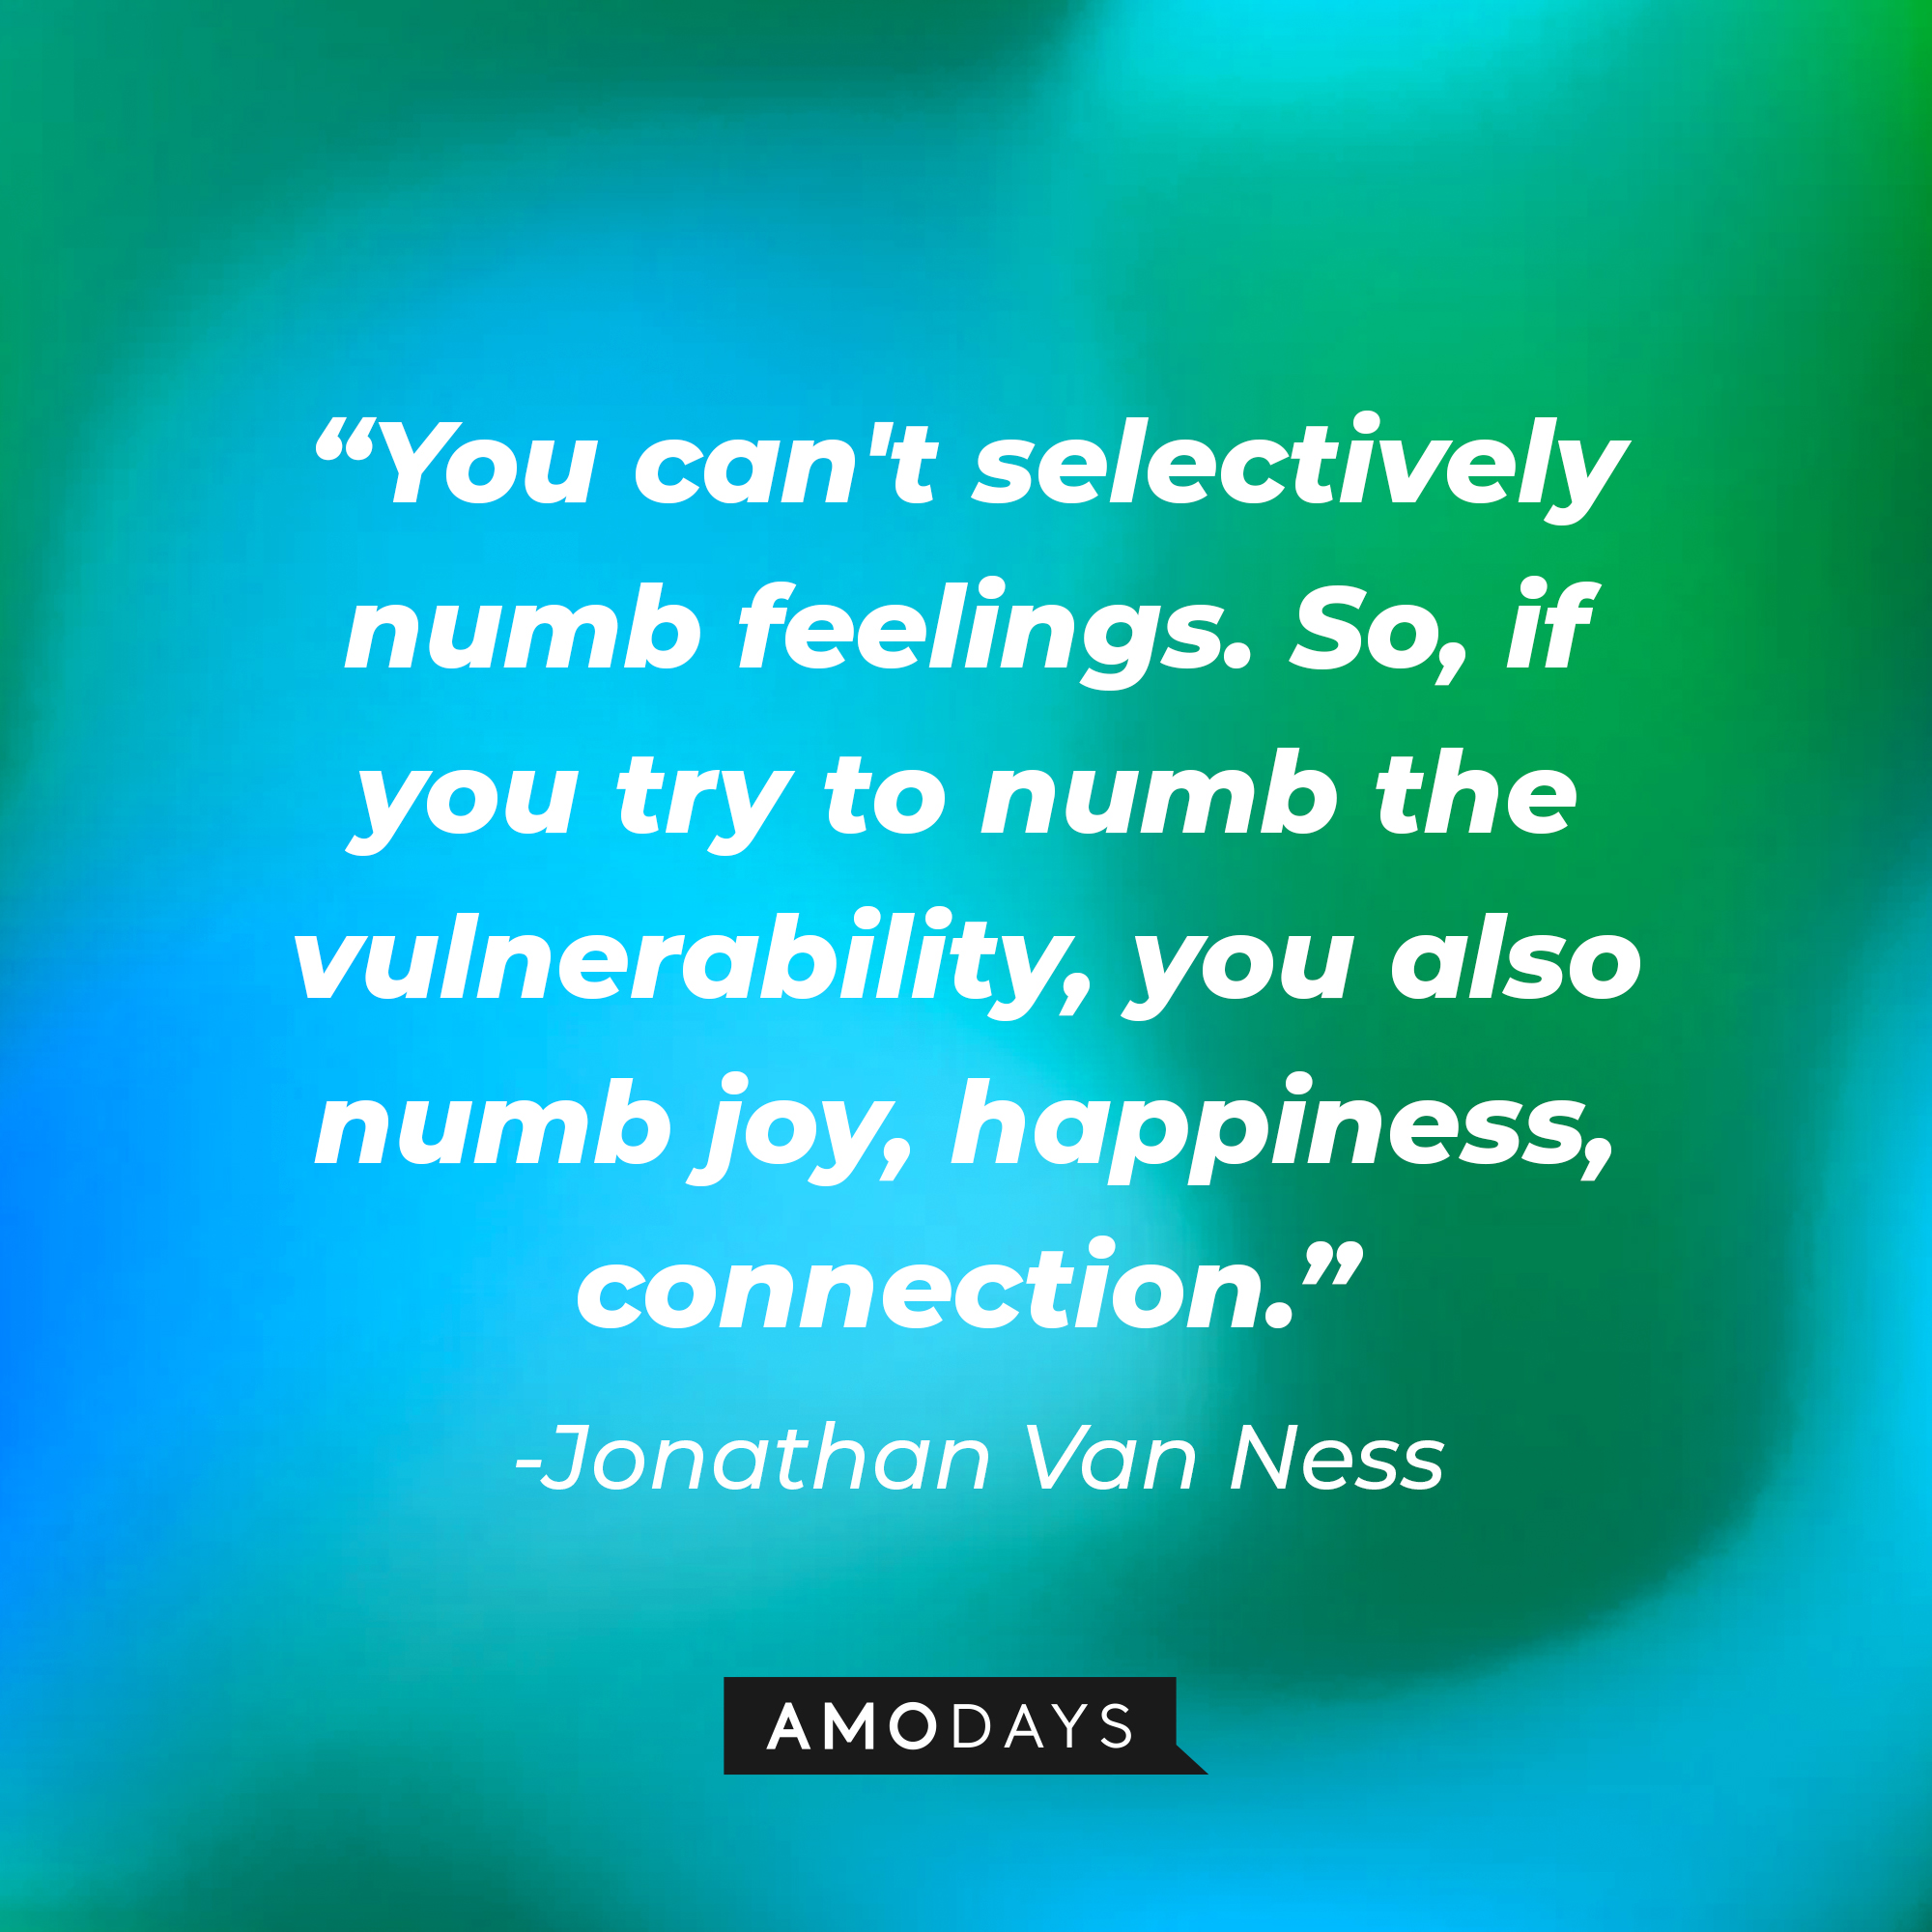 Jonathan Van Ness’ quote: "You can't selectively numb feelings. So, if you try to numb the vulnerability, you also numb joy, happiness, connection." | Image: AmoDays